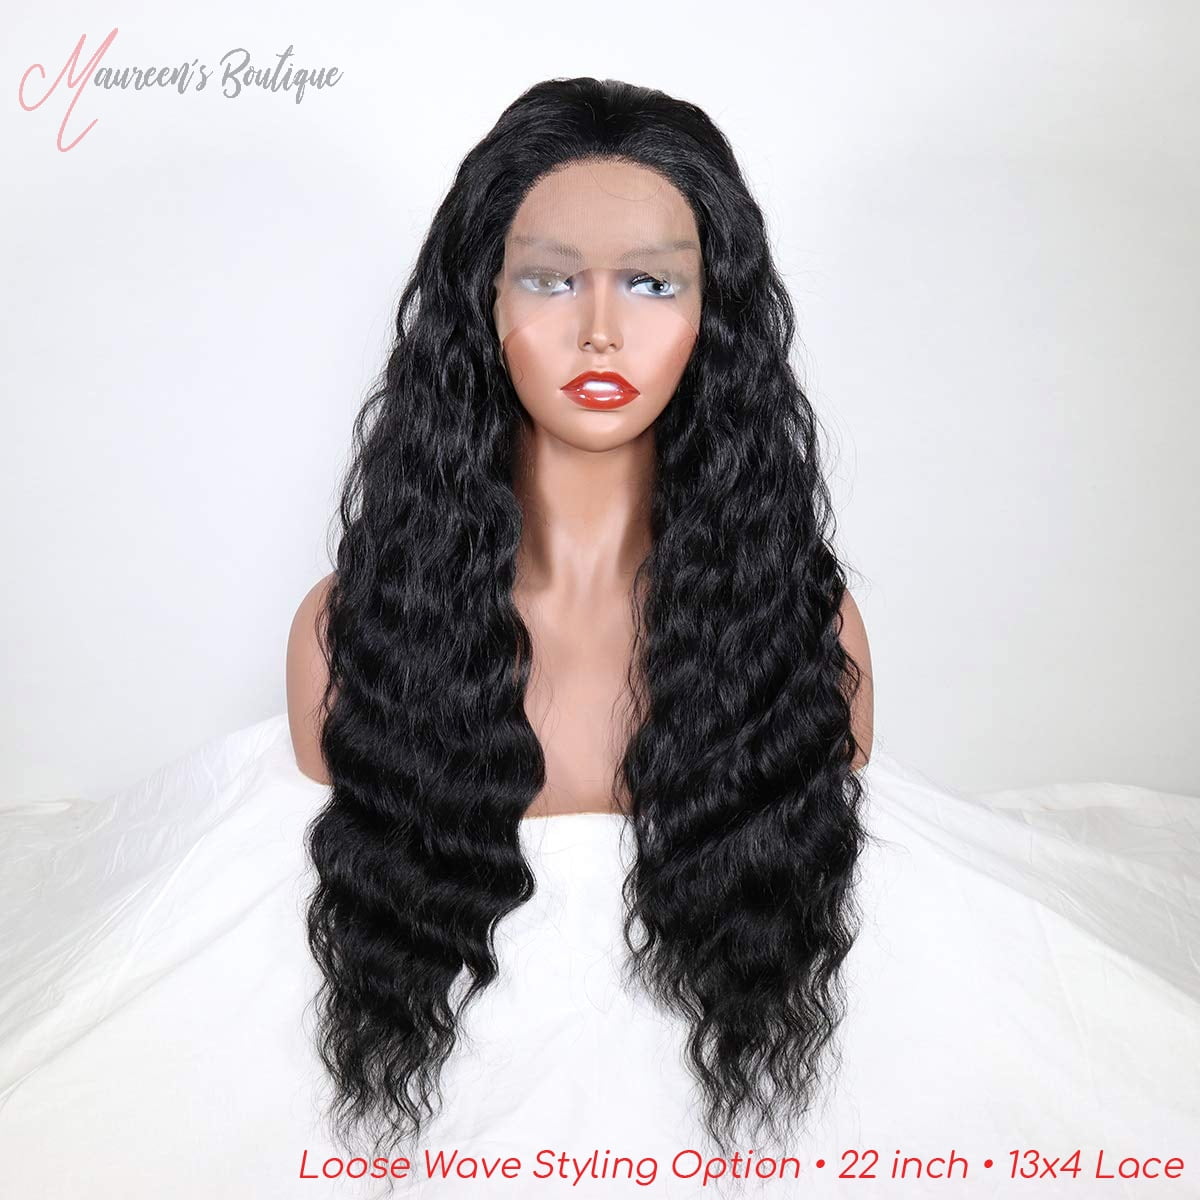 Loose wave wig styling example 1